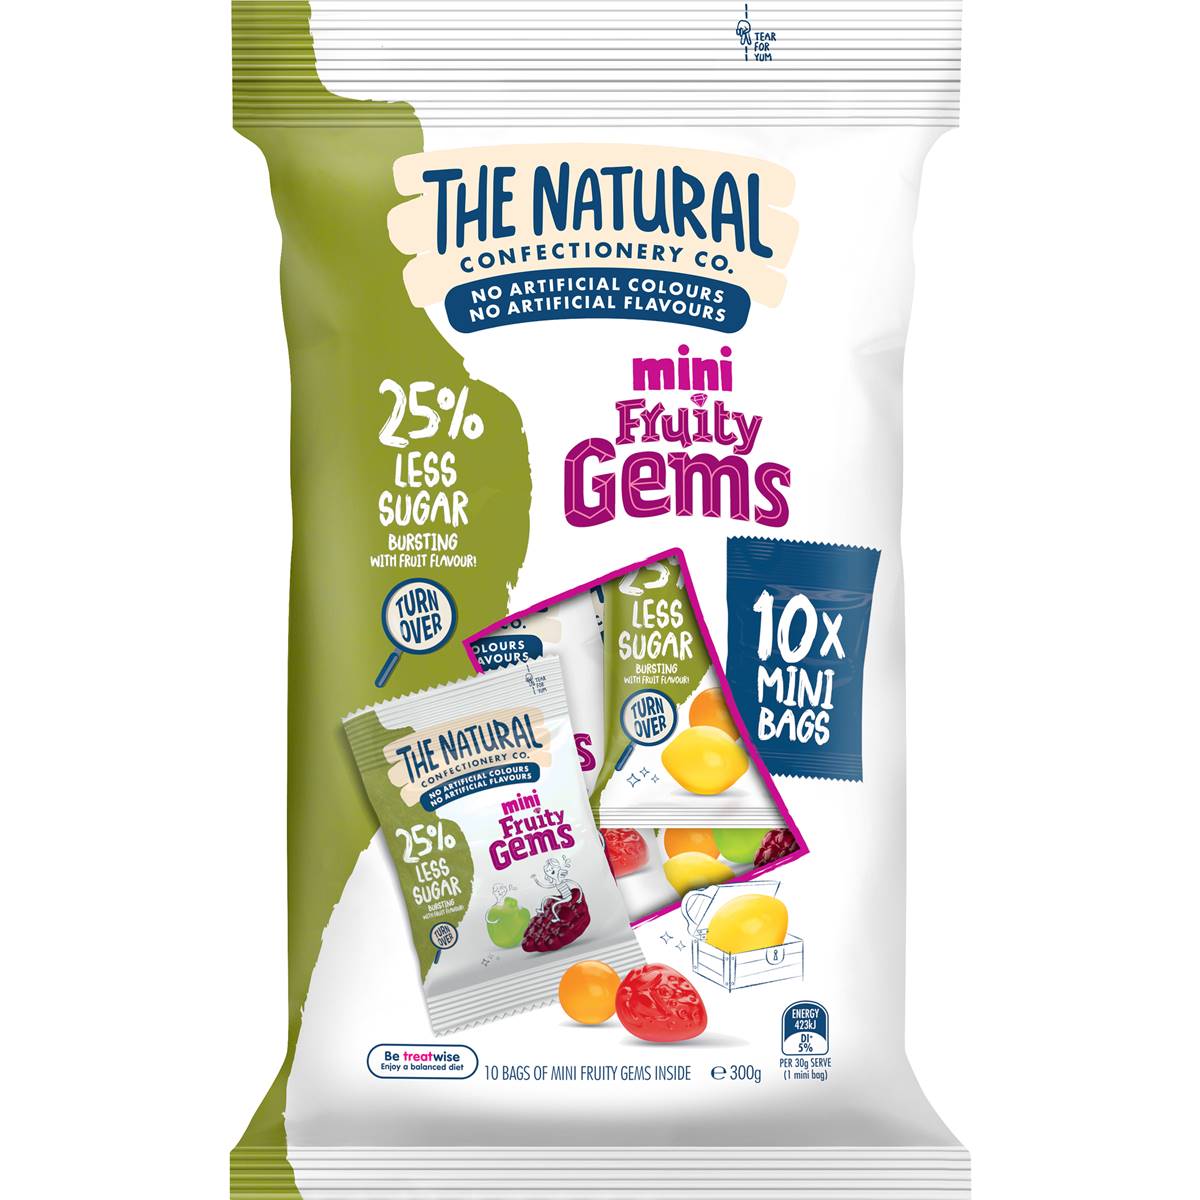 Calories in The Natural Confectionery Co. 25% Less Sugar Mini Fruity Gems Lollies